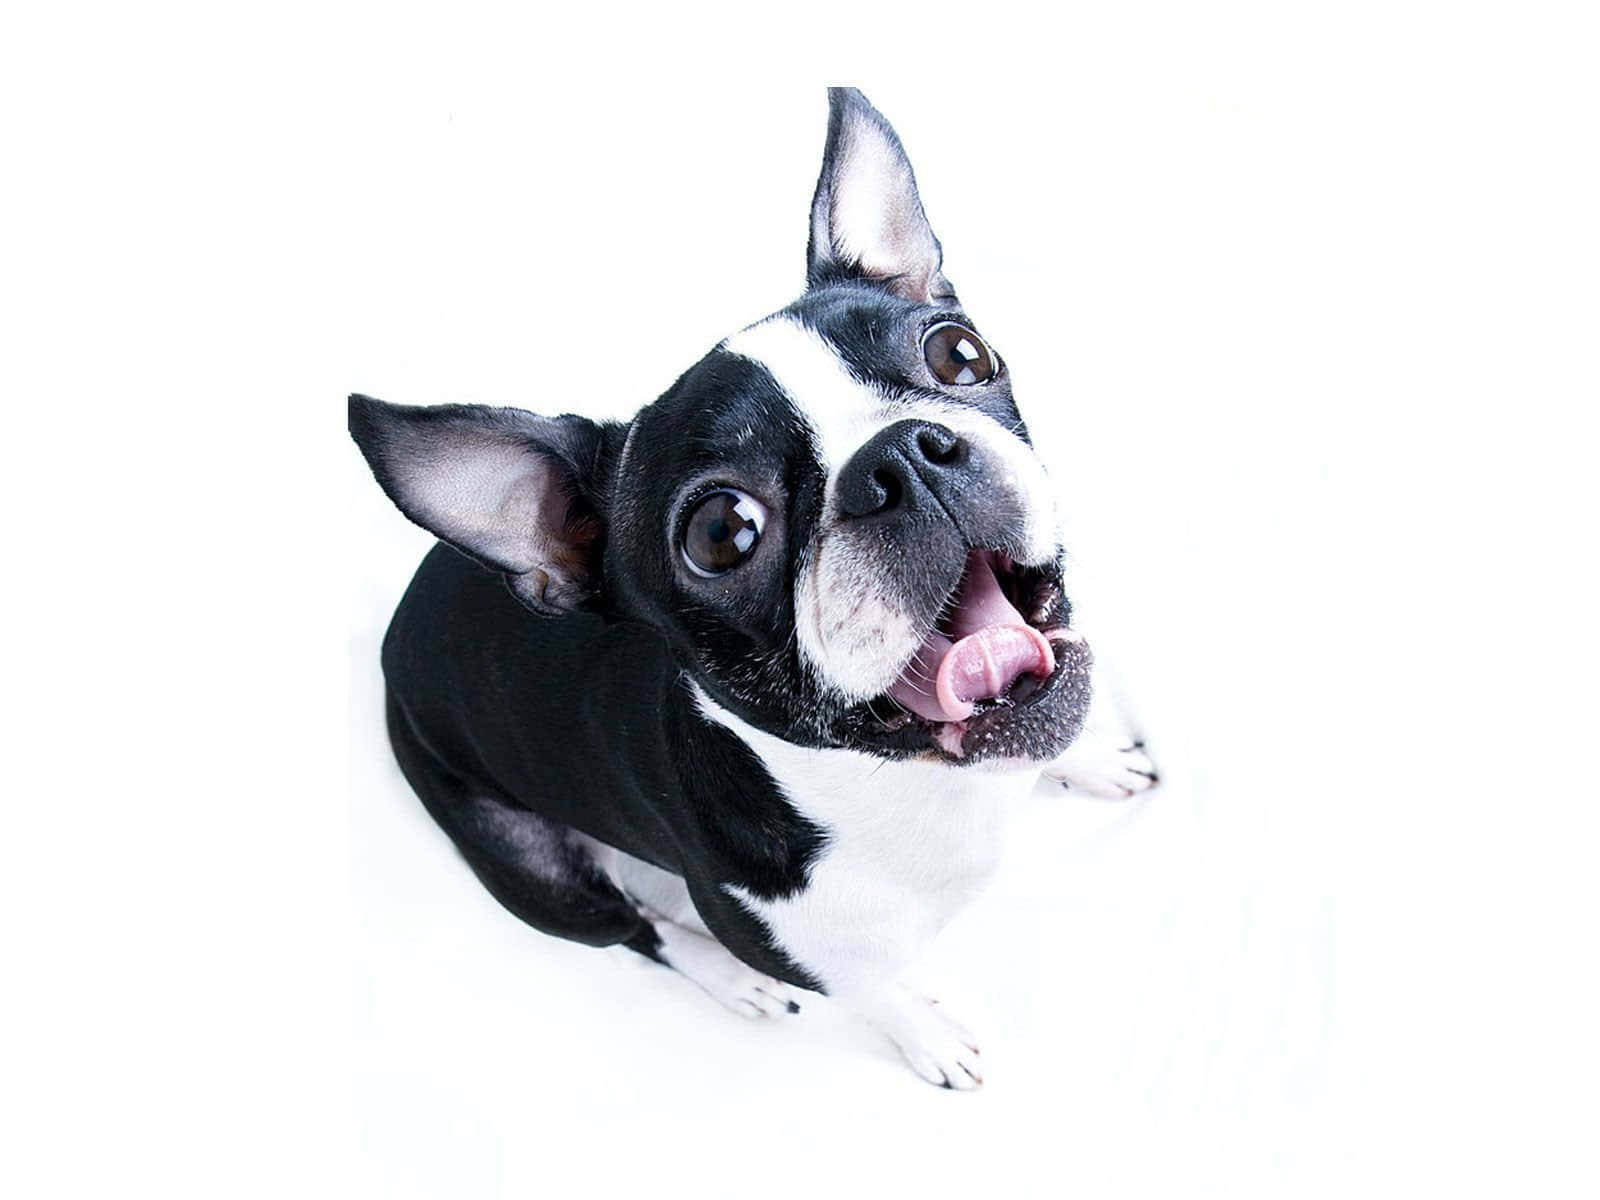 "This is a happy Boston Terrier ready to bring a smile to your face." Wallpaper